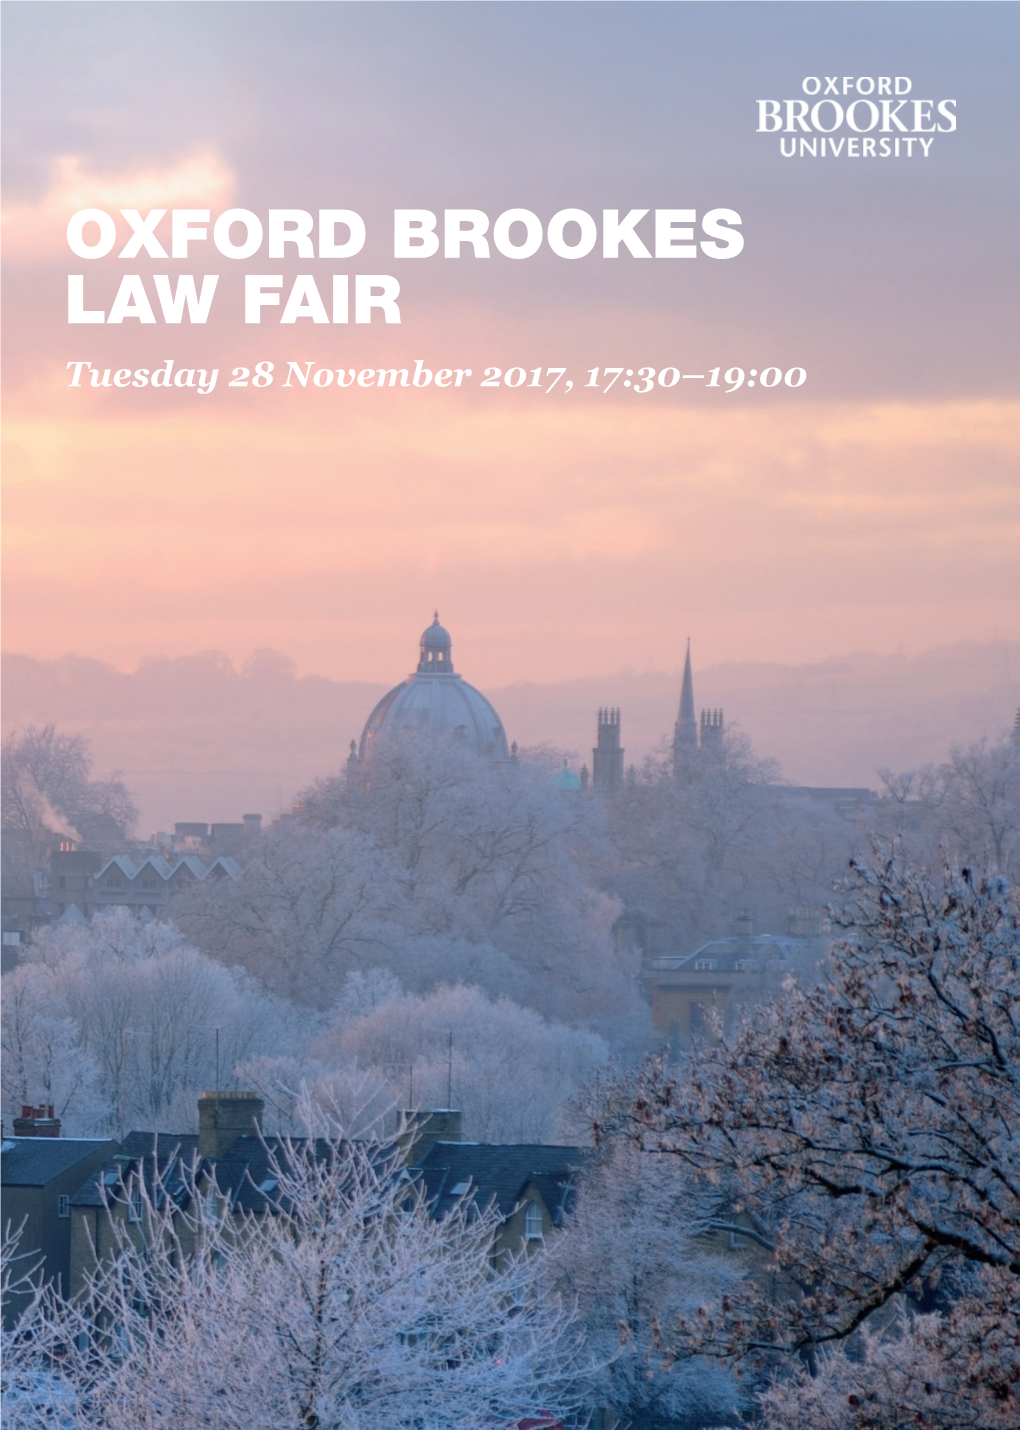 OXFORD BROOKES LAW FAIR Tuesday 28 November 2017, 17:30–19:00 Contents